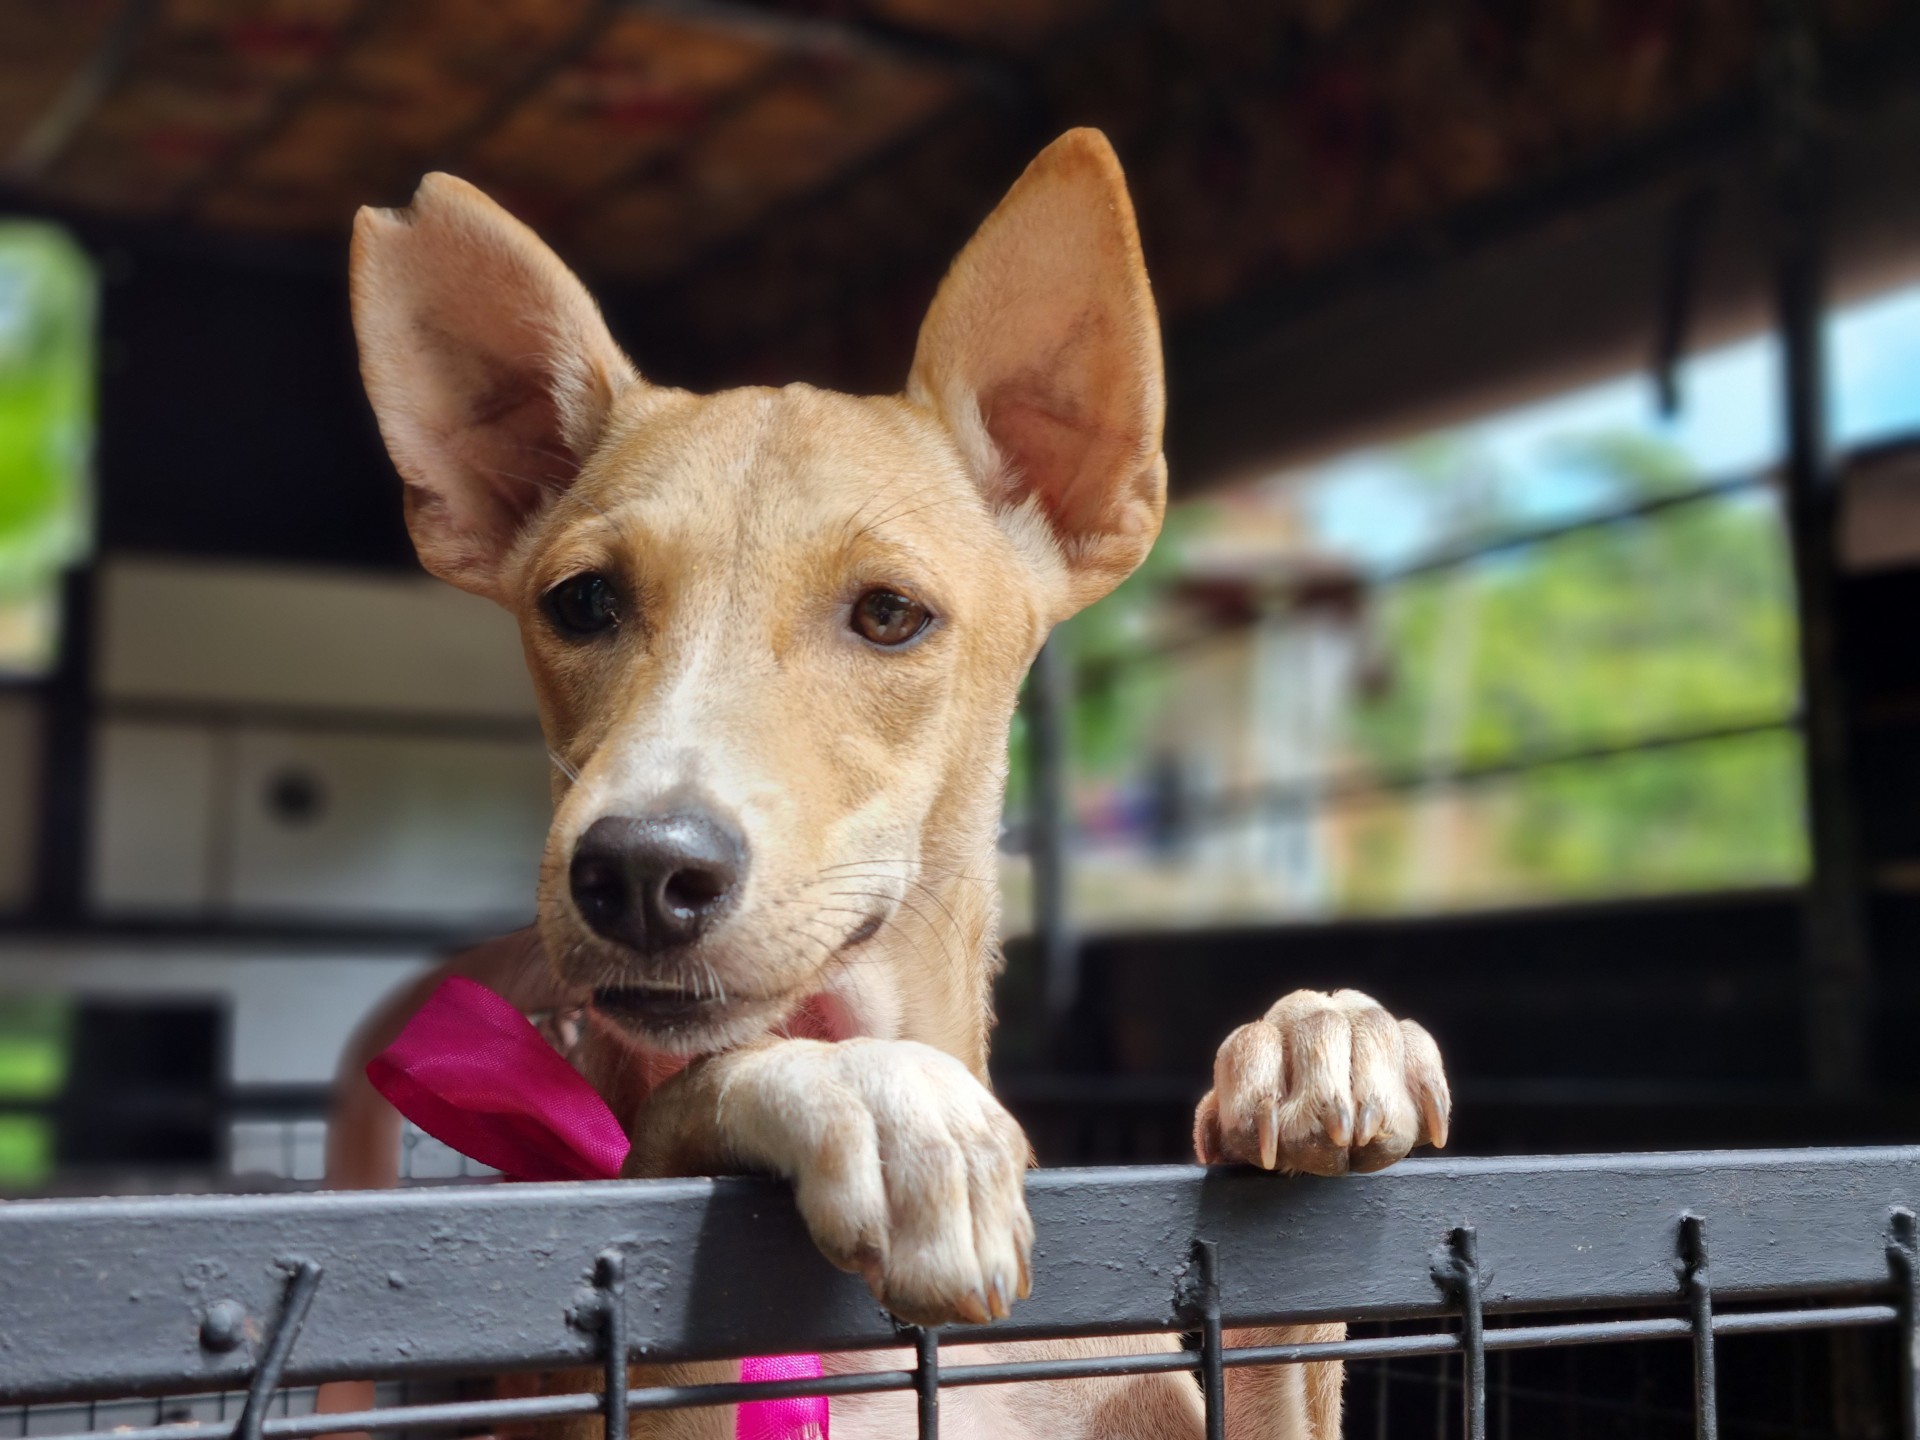 Dogs in Sri Lanka have their ears tipped to show they've been neutered